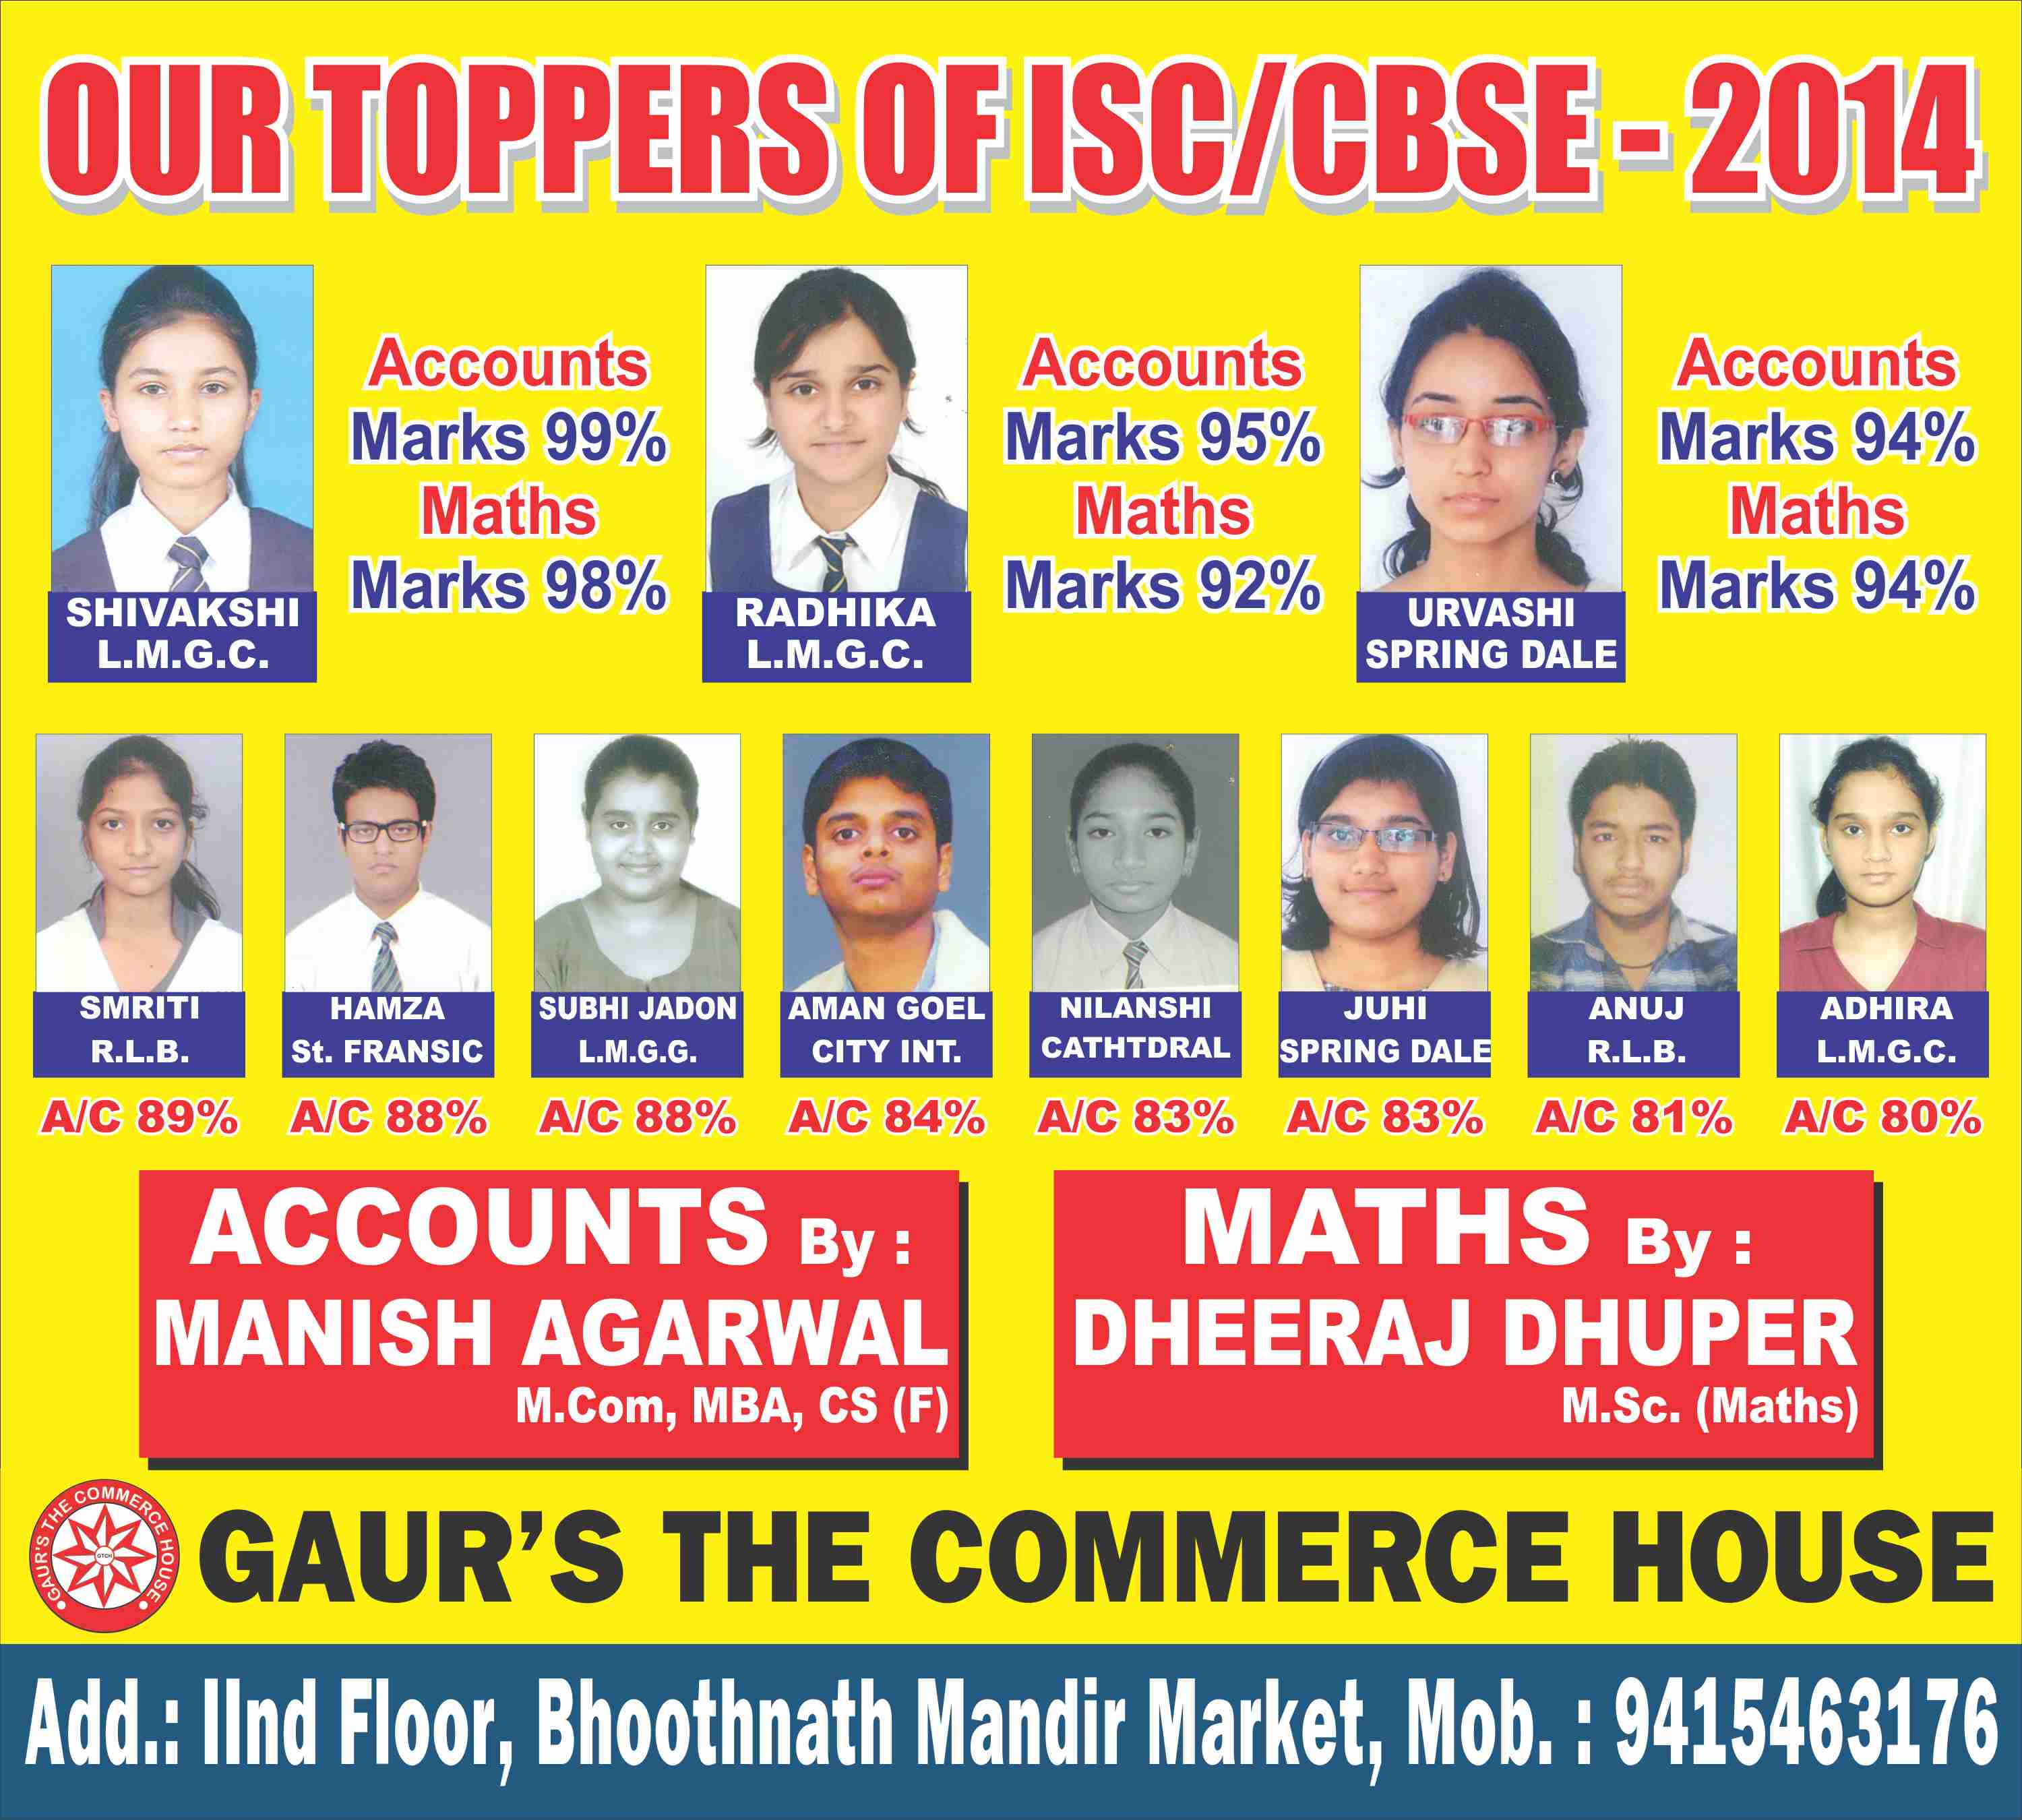 Our Toppers of ISC/CBSE 2014